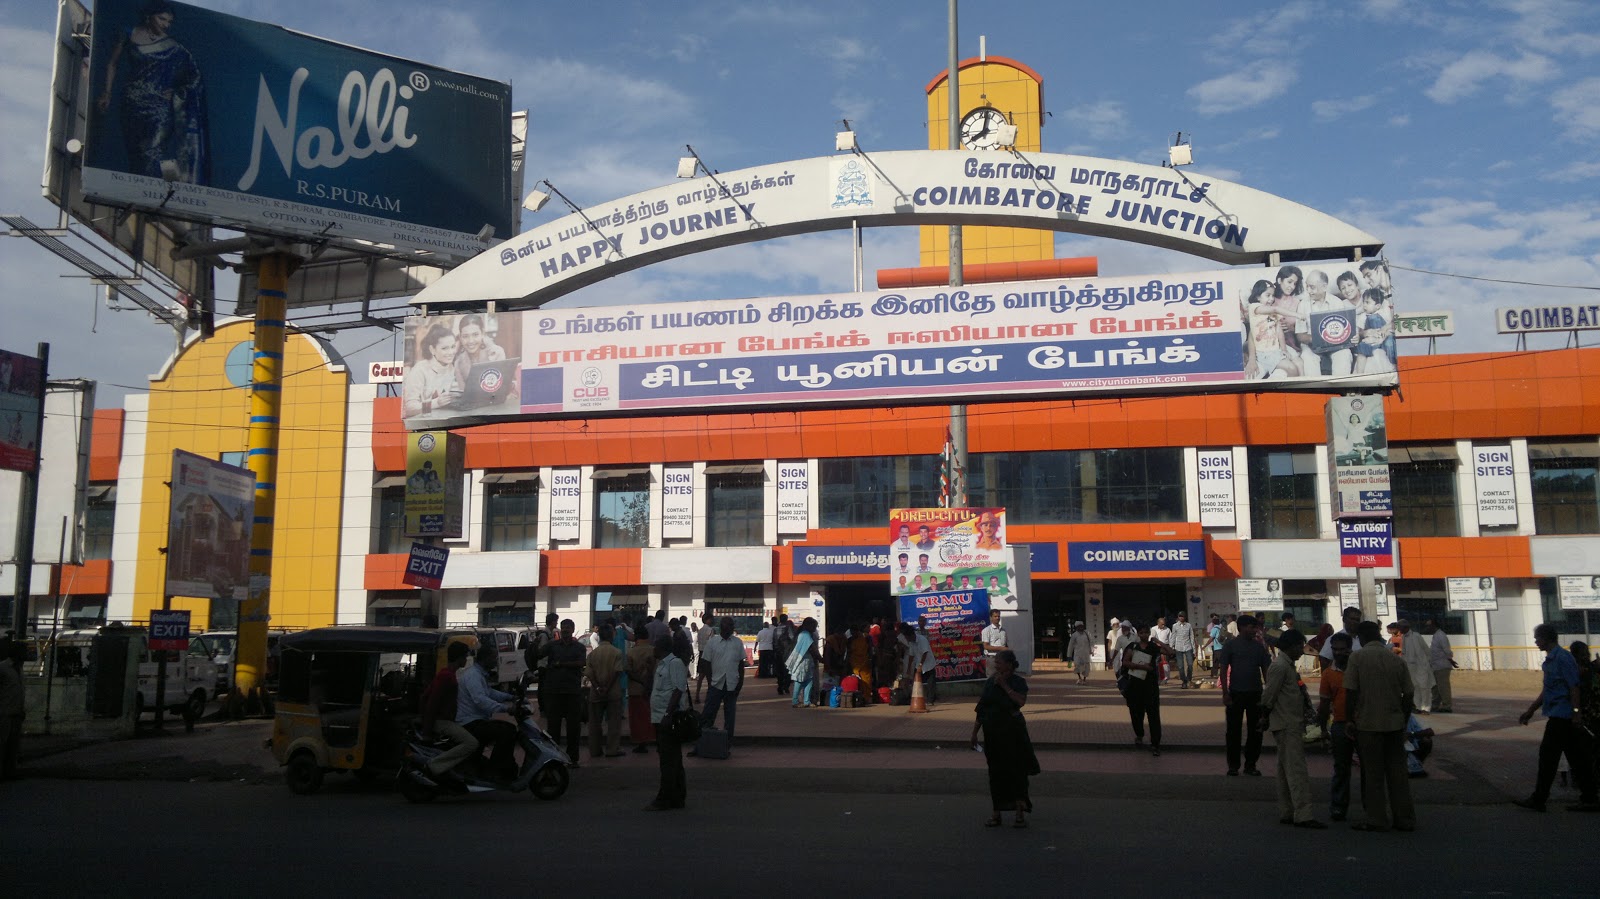 The Enablist: No facilities for PwD at Coimbatore railway station